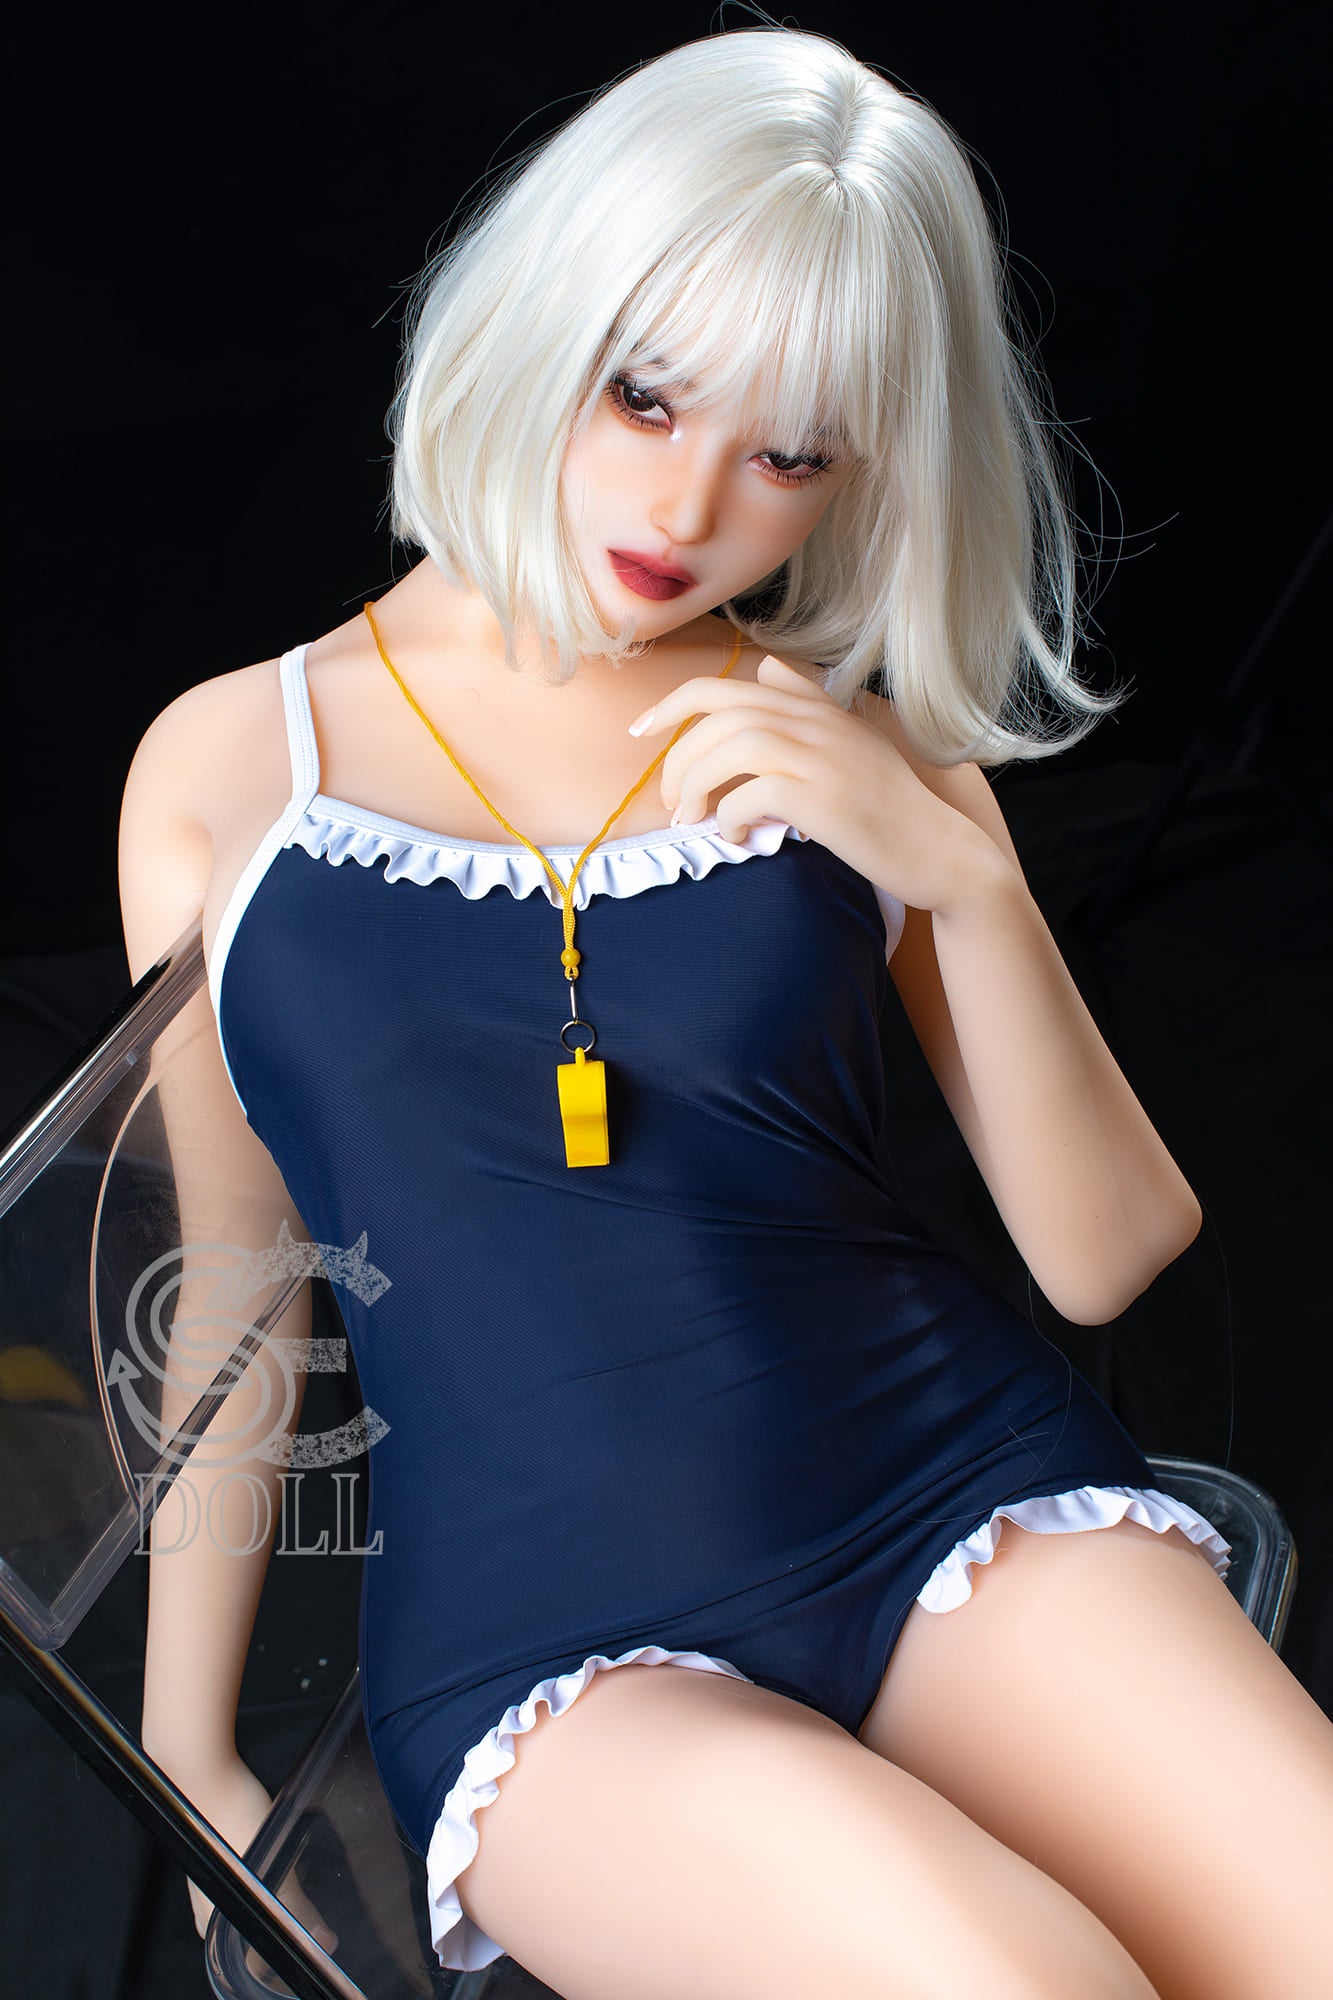 cosplay sex doll with cute face and blonde hair